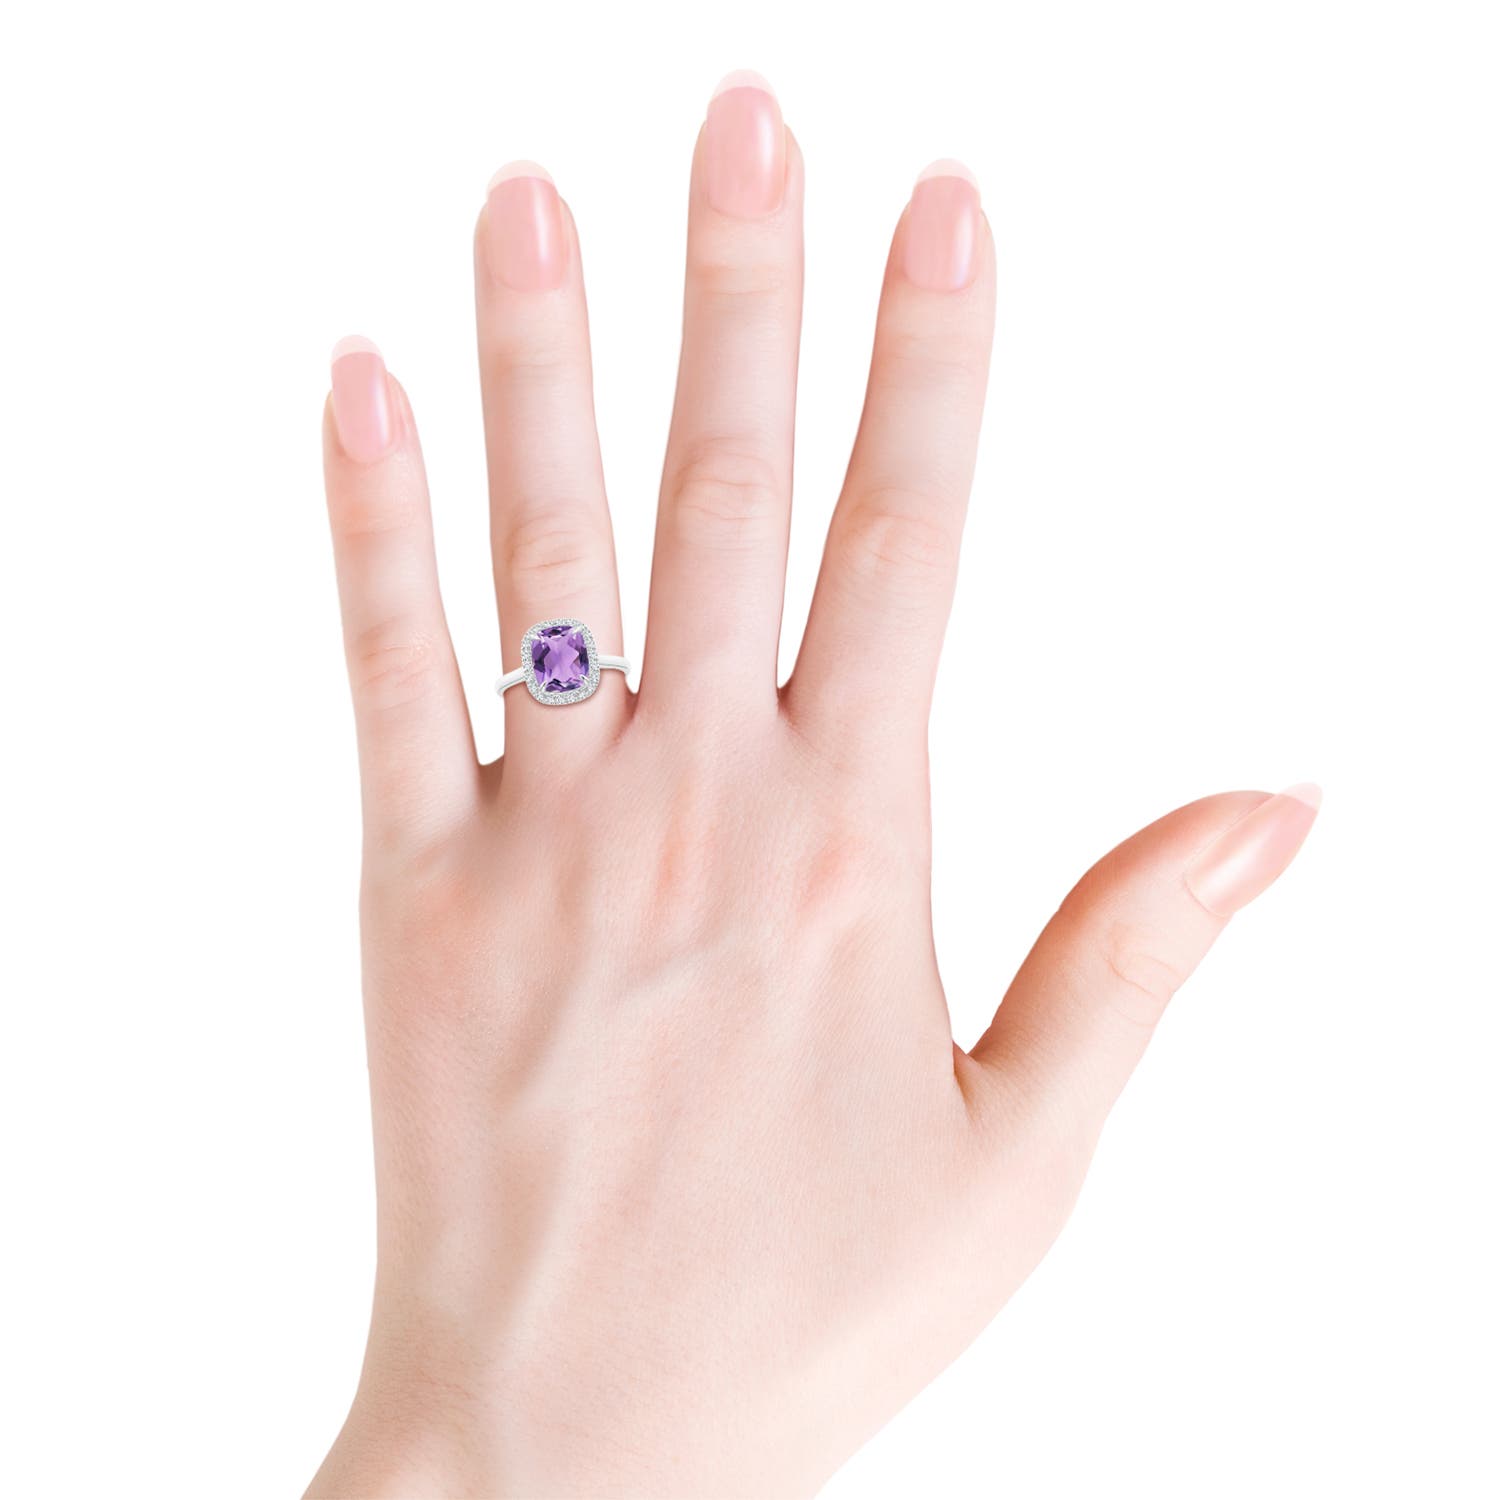 A - Amethyst / 2.22 CT / 14 KT White Gold